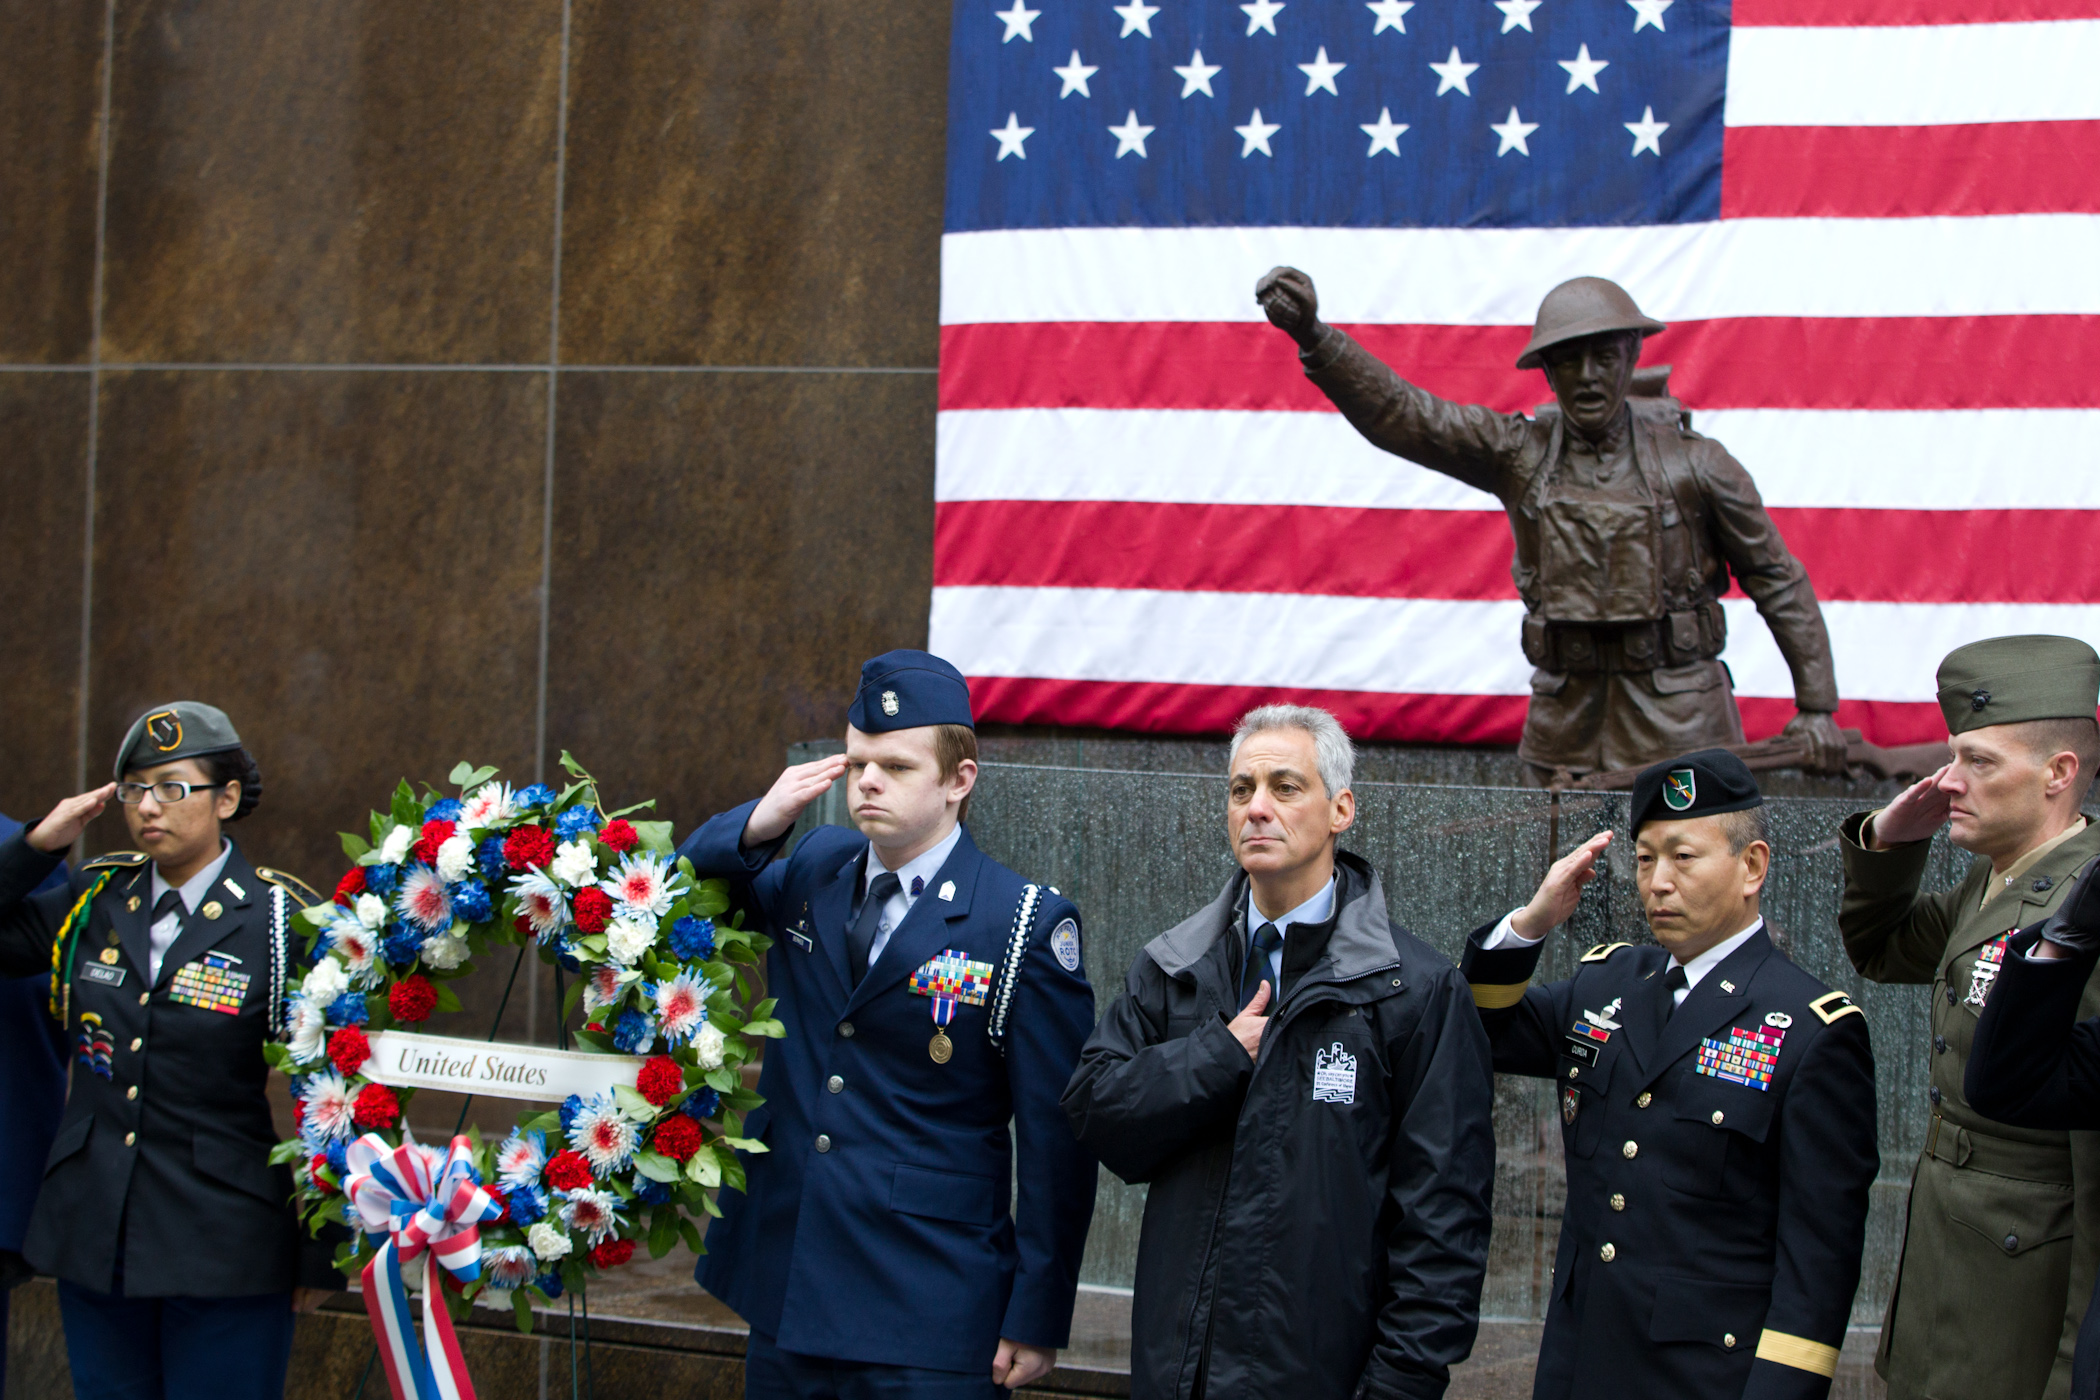 Mayor Emanuel attends City of Chicago’s annual Veterans Day wreath laying ceremony. 